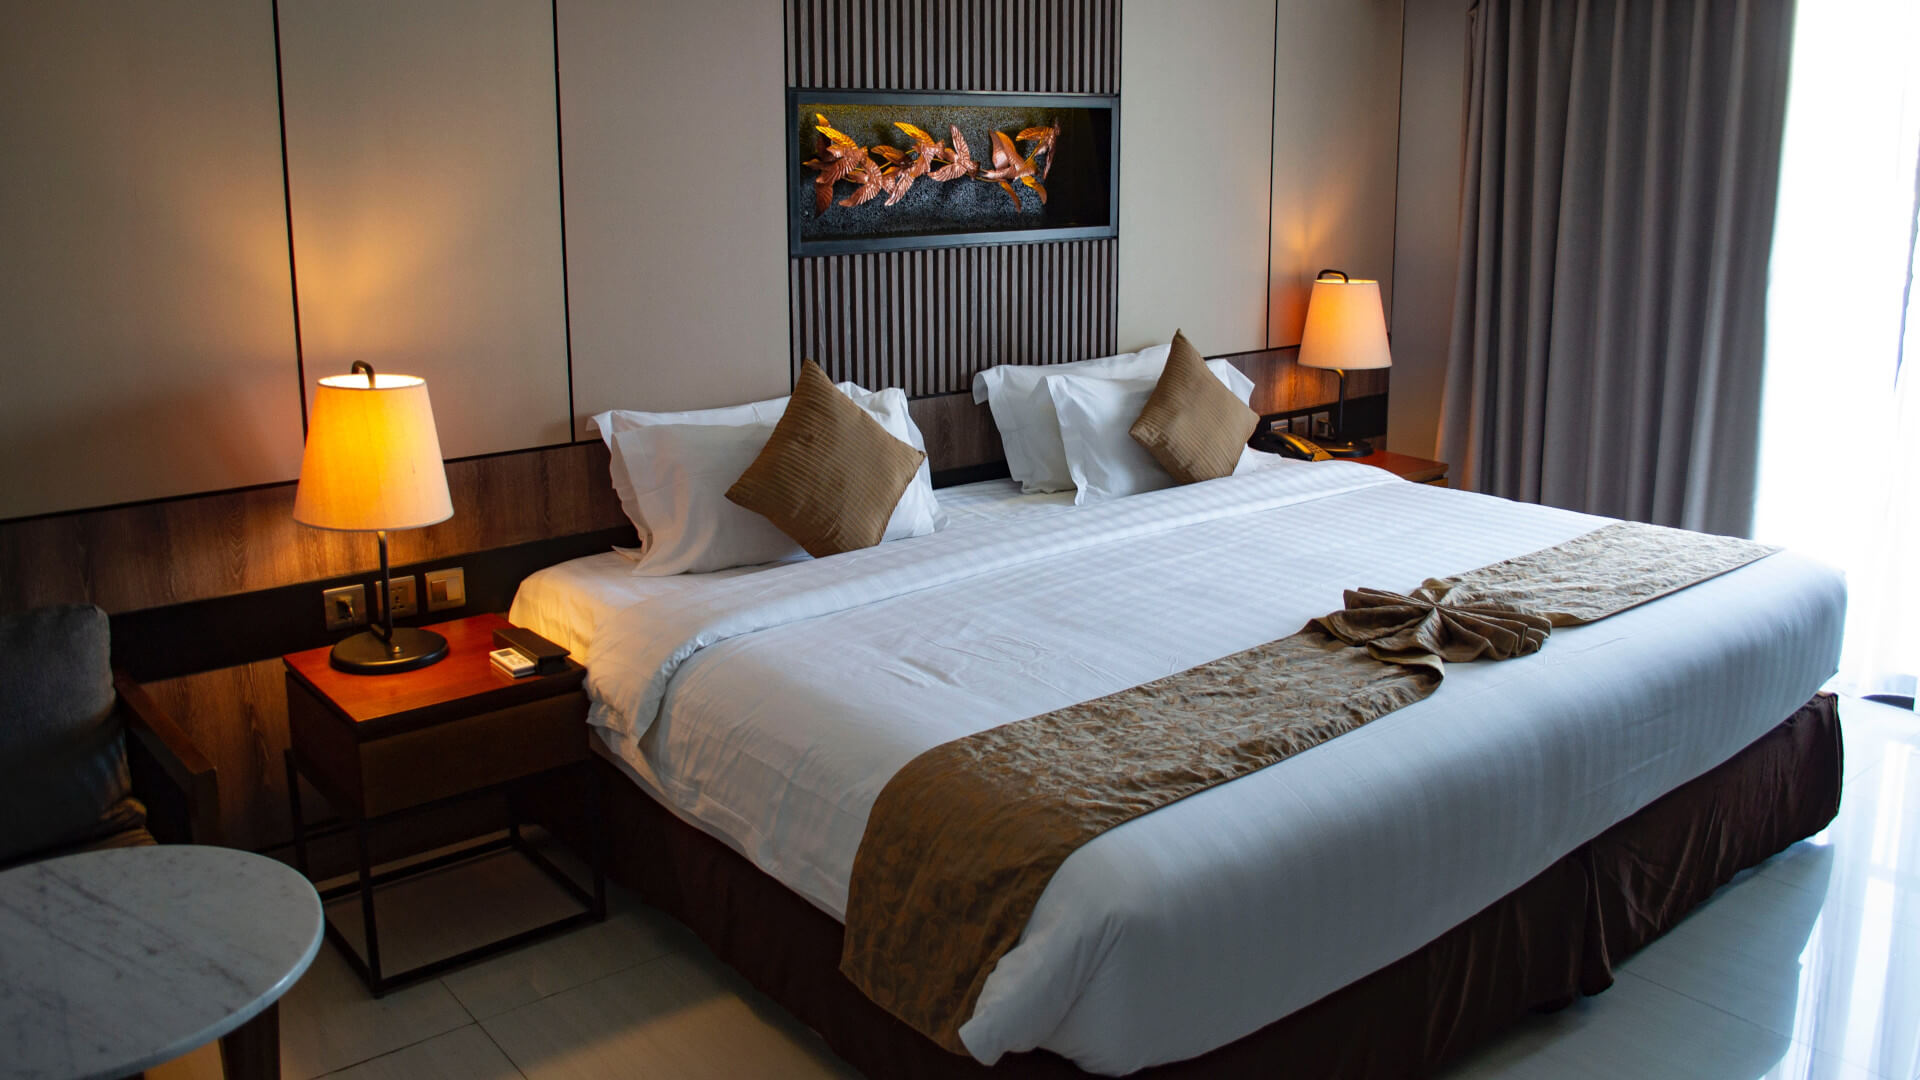 How can you choose the best hotel bed? TOP 5 ranking by Mebway!